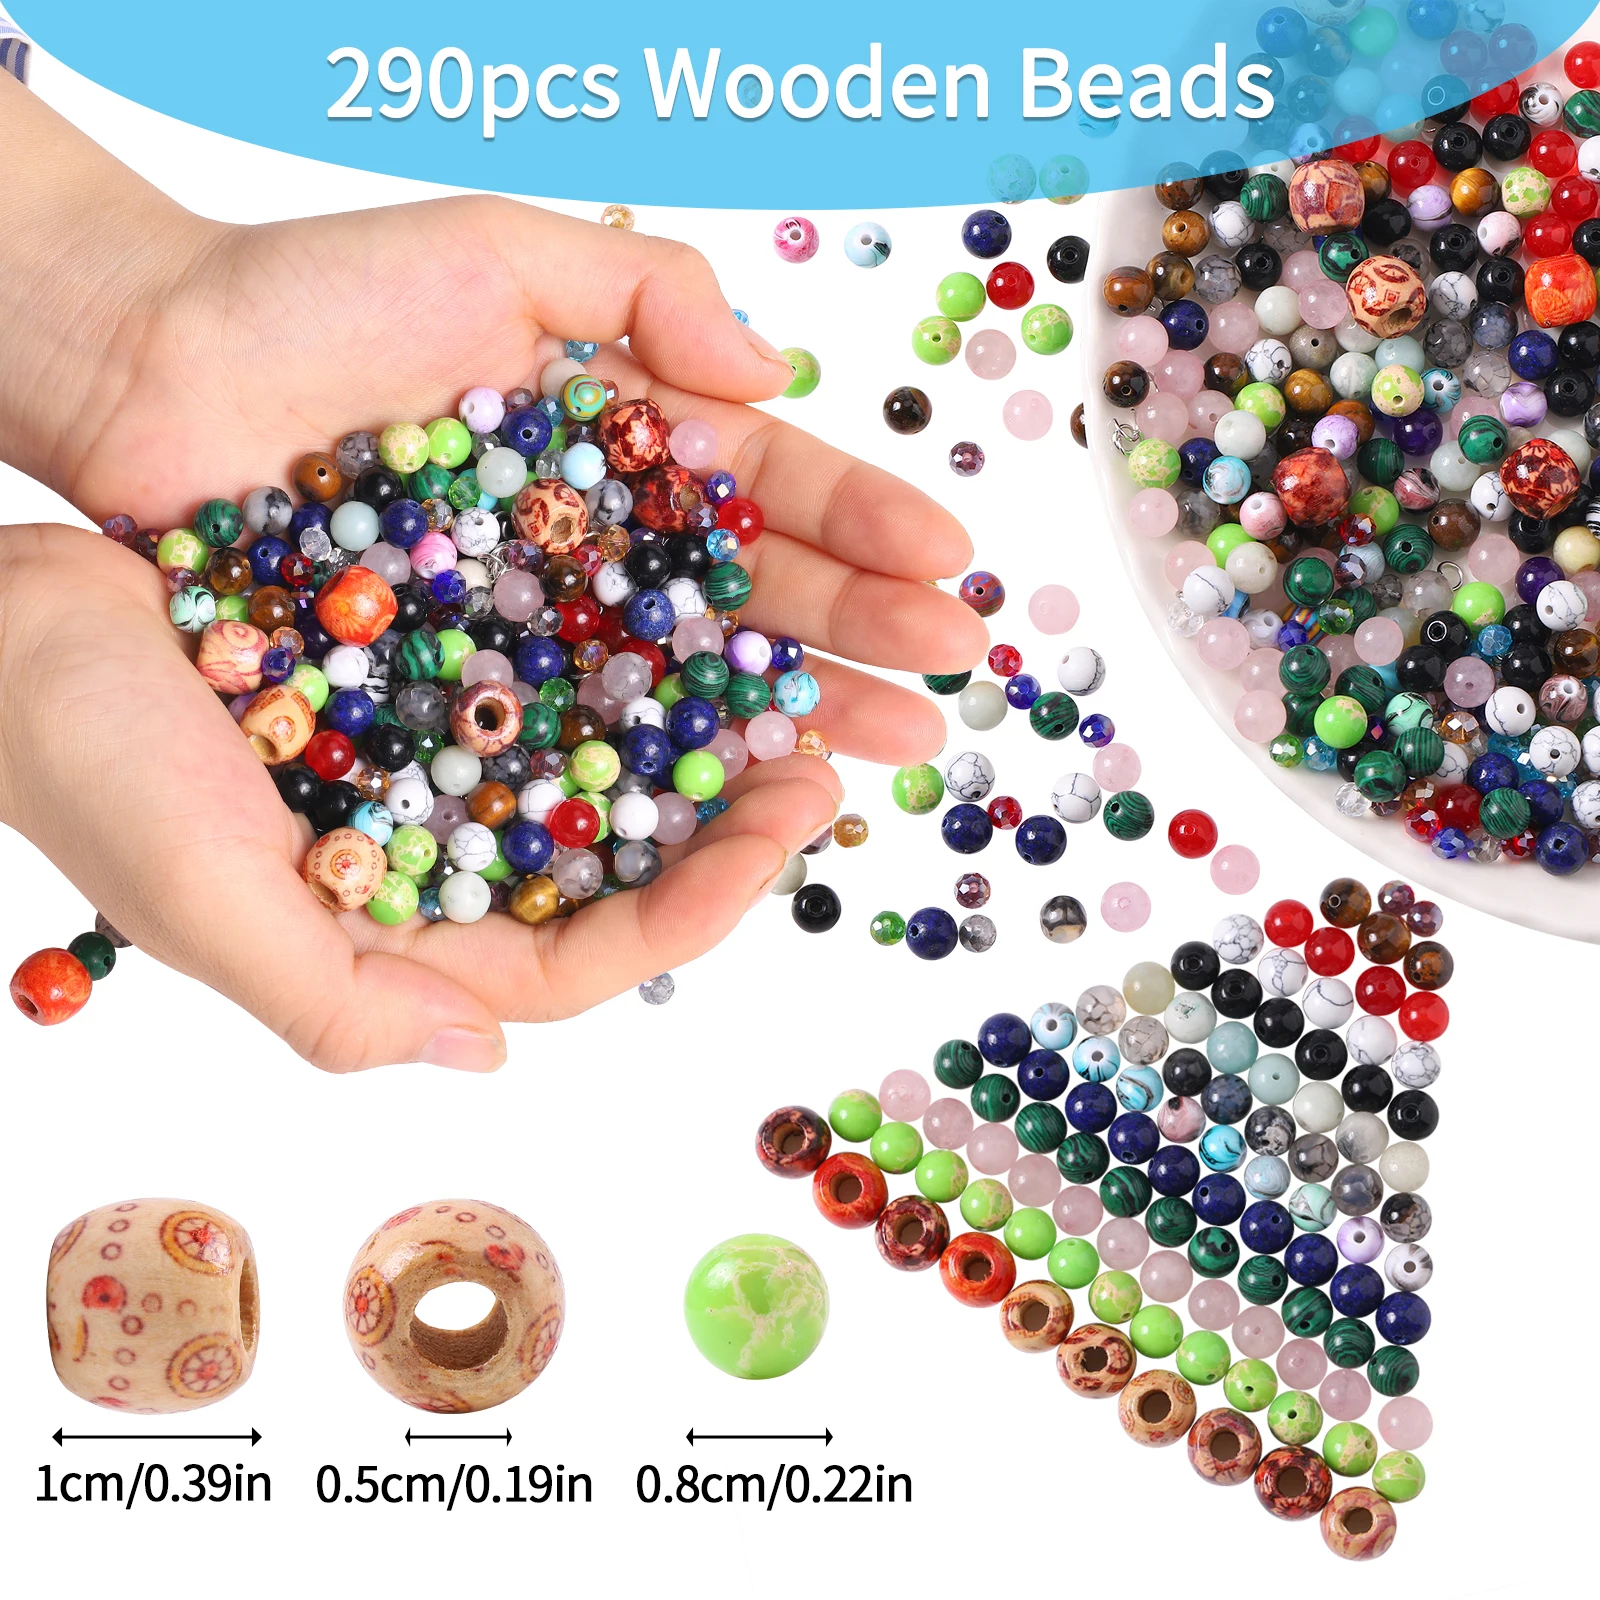 290pcs Wood Handmade DIY Mixed Alphabet Letter Beads send tools Charms Beads for Making Jewelry Handmade Bracelets Accessories fashion wood jewelry display necklace charms jewelry display tray pendant earrings card style pendant display card